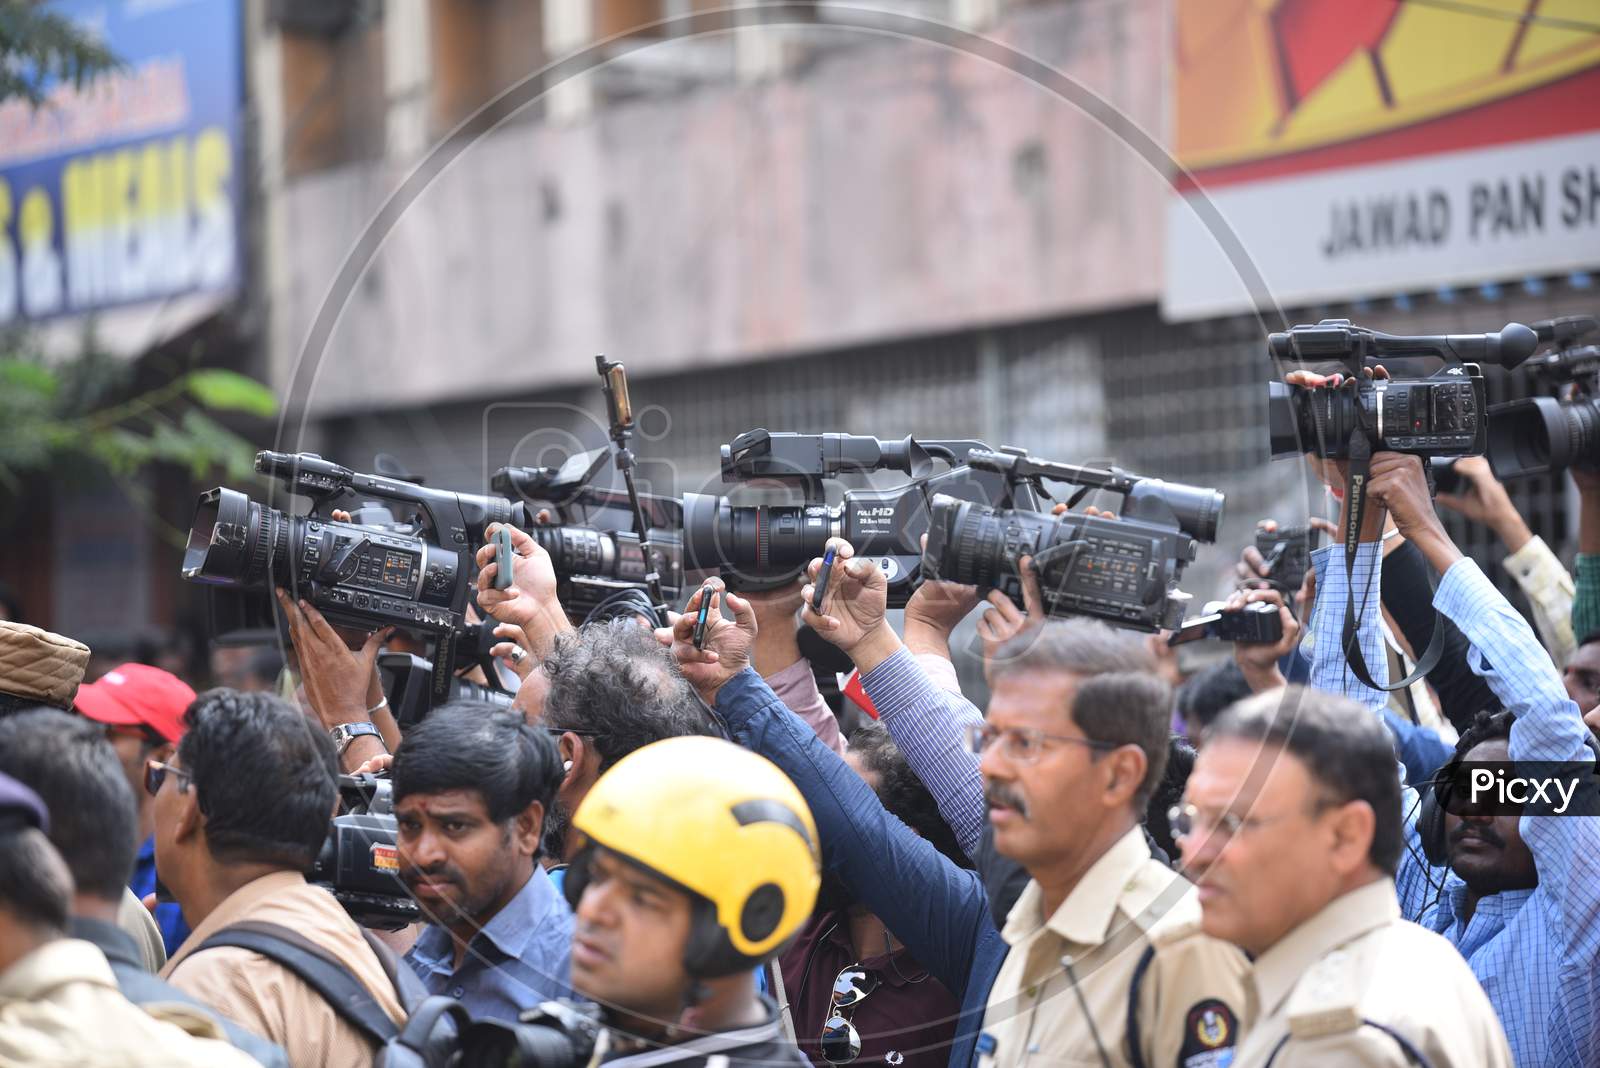 Media and Journalists covering police detentions at exhibition grounds